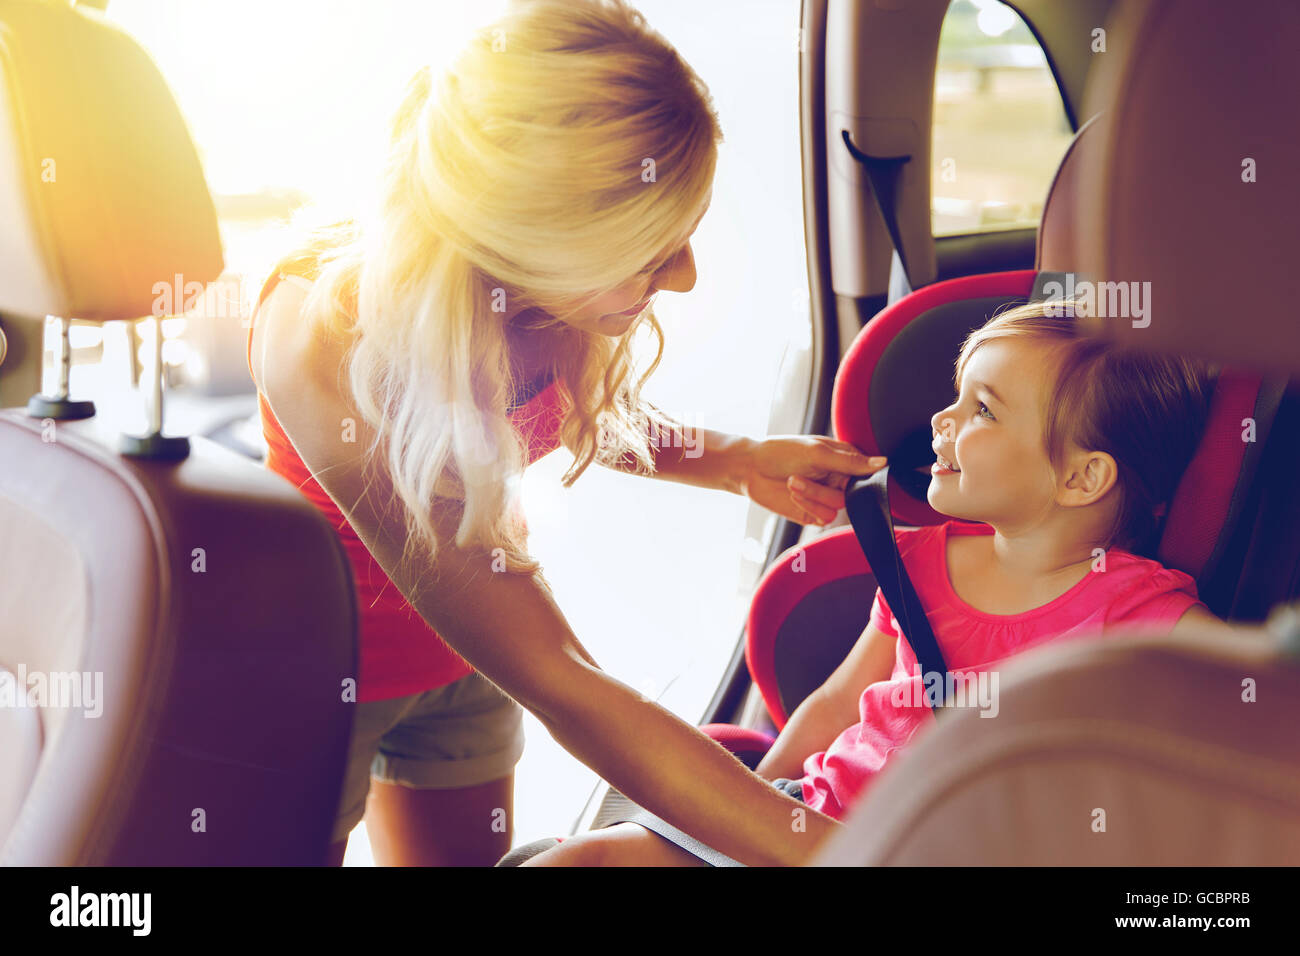 happy mother fastening child with car seat belt Stock Photo